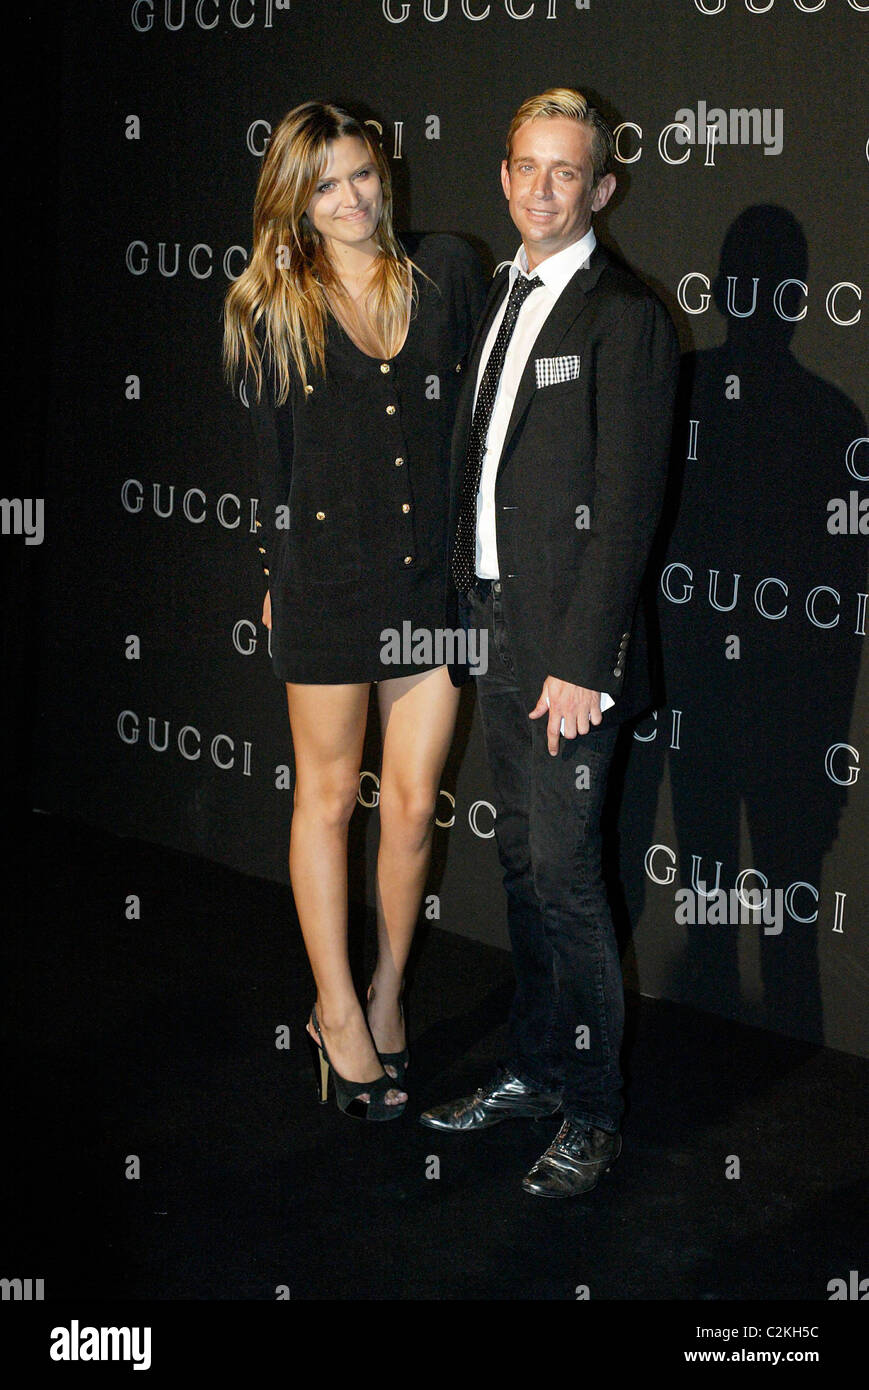 Cheyenne Tozzi and Toby Osmond Gucci Spring/Summer 2008 Collection Sydney,  Australia - 19.03.08 Robert Wallace Stock Photo - Alamy